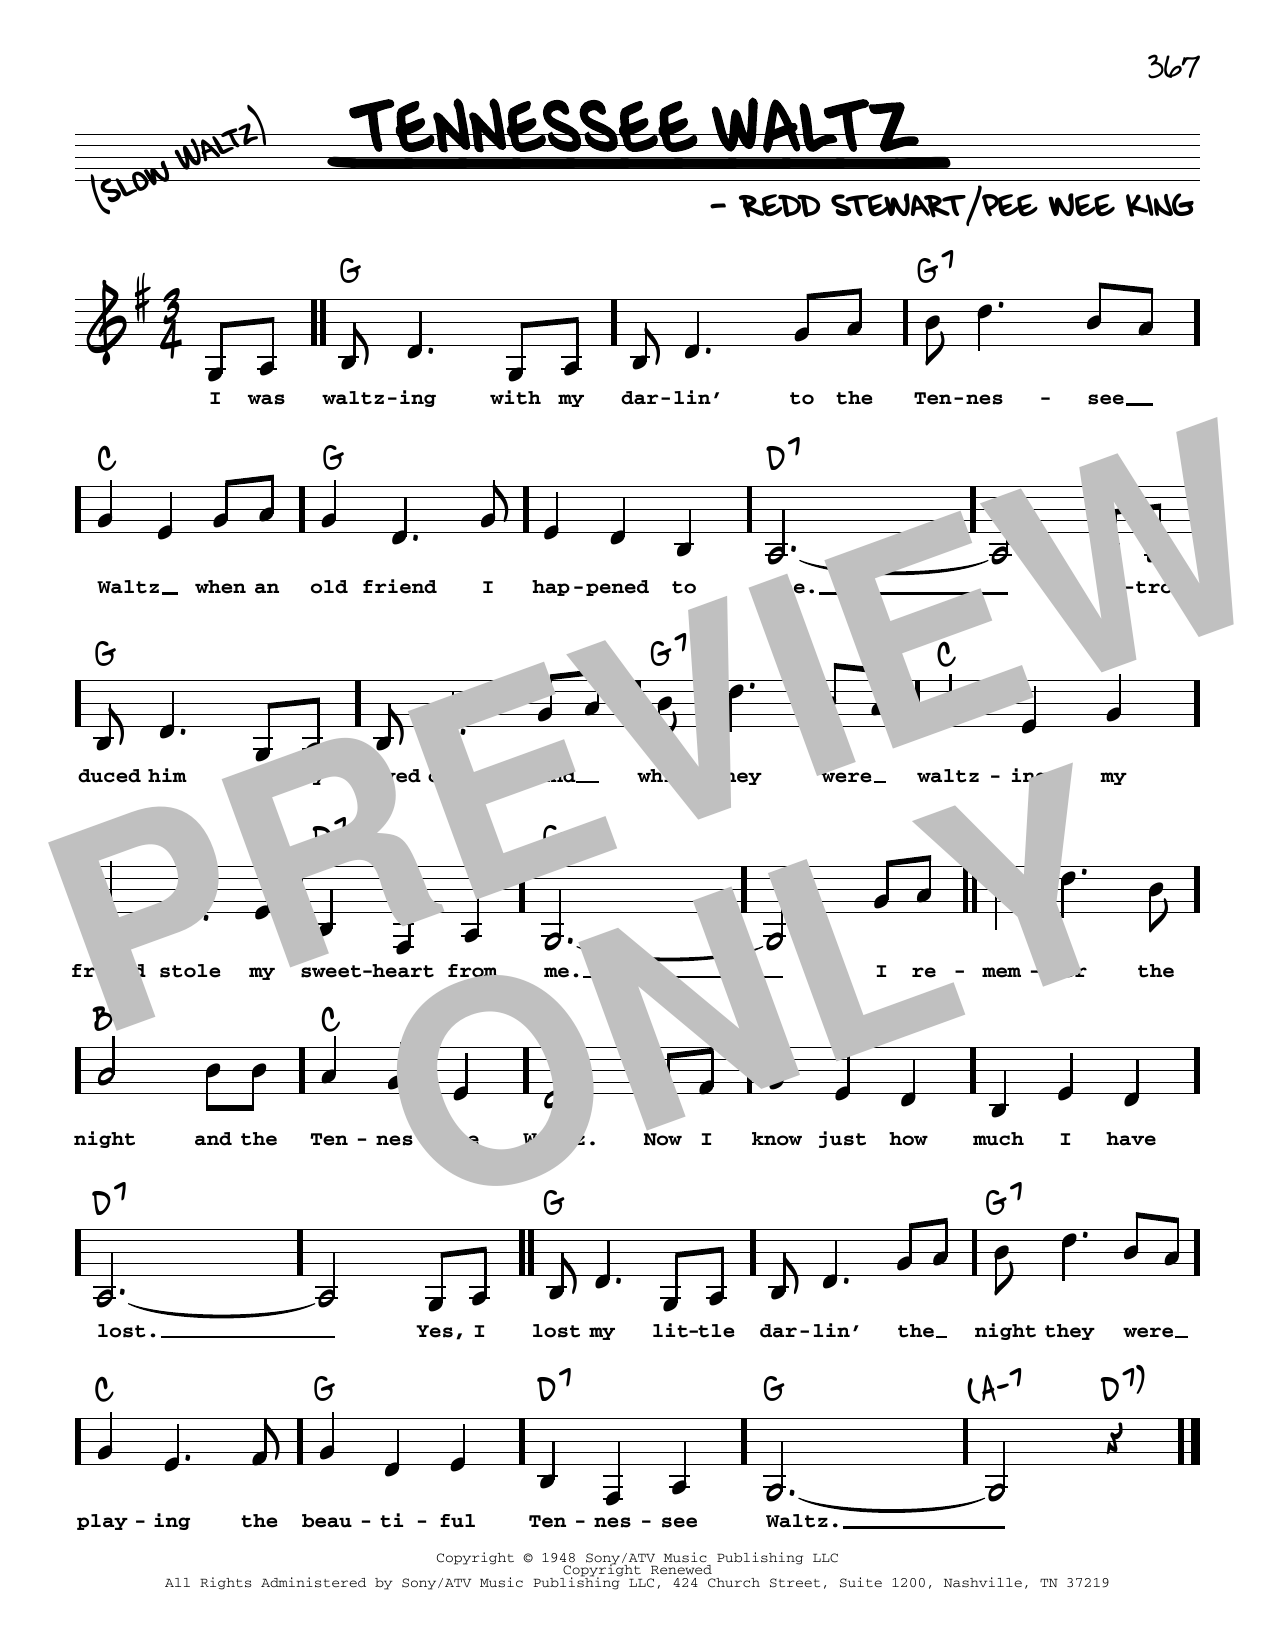 Download Pee Wee King Tennessee Waltz (Low Voice) Sheet Music